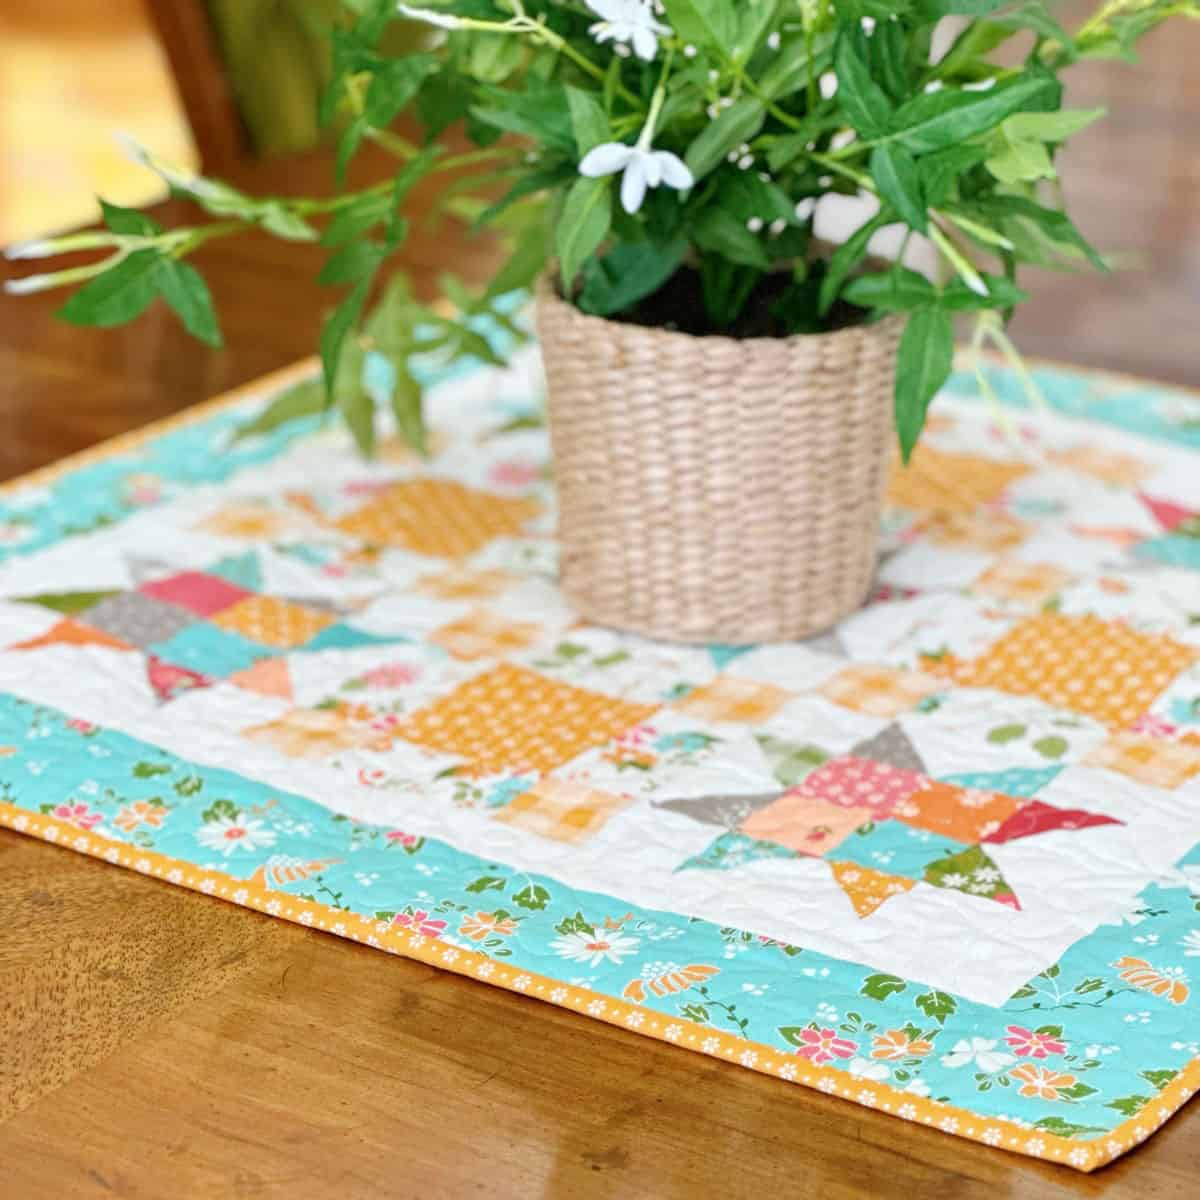 Quilted Stars and Patchwork Table Topper in Bountiful Blooms fabrics by Sherri & Chelsi for Moda Fabrics